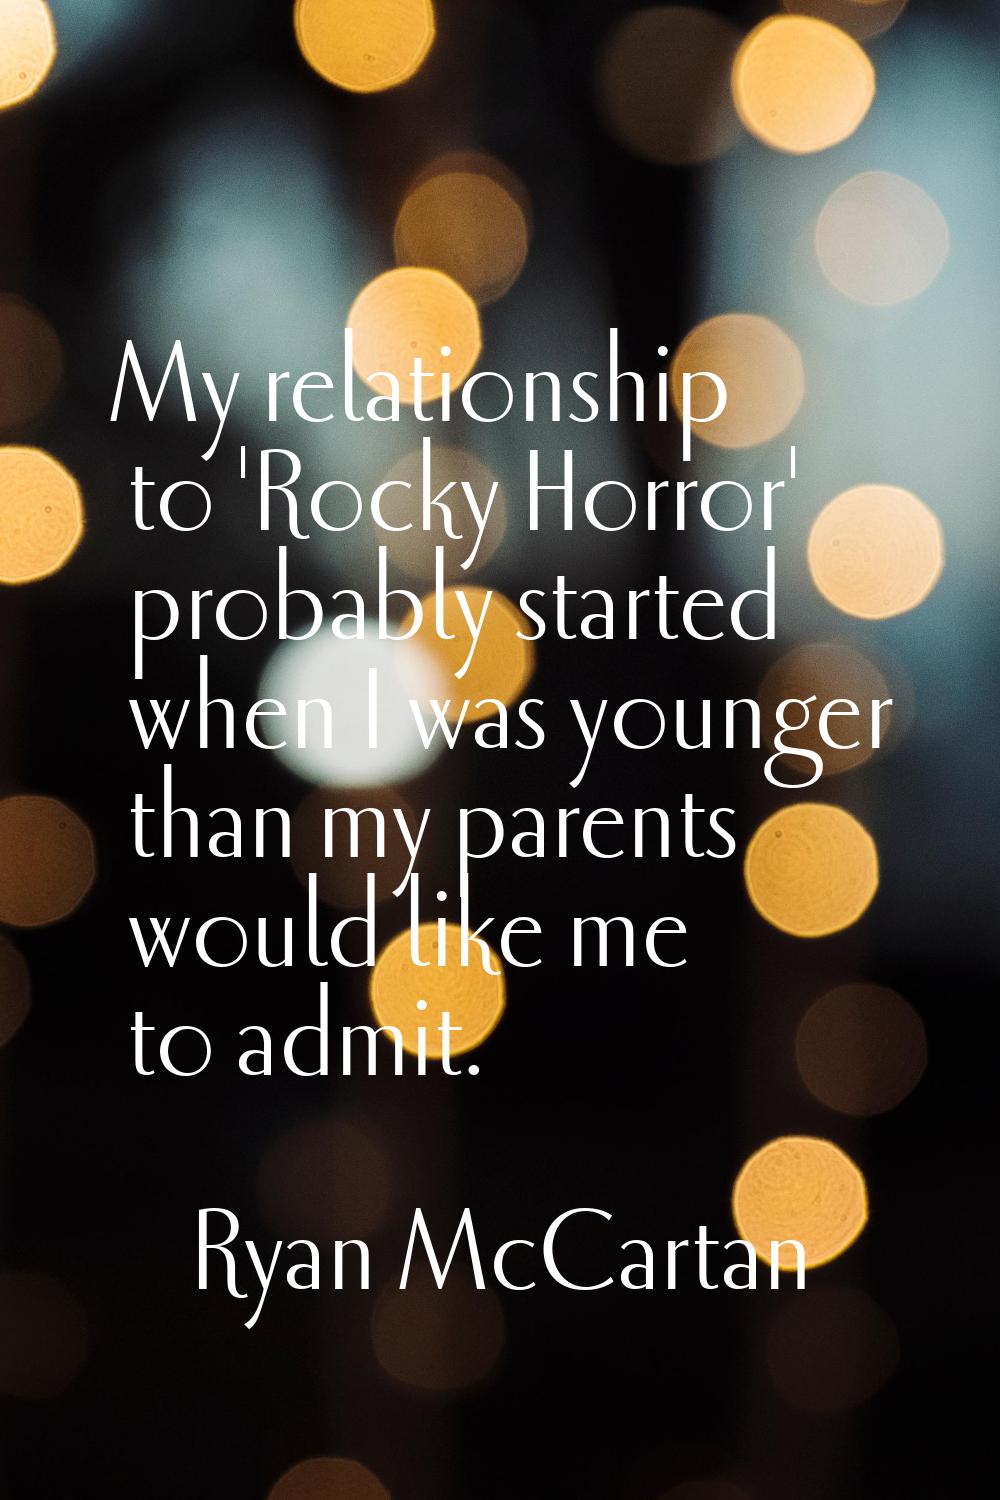 My relationship to 'Rocky Horror' probably started when I was younger than my parents would like me